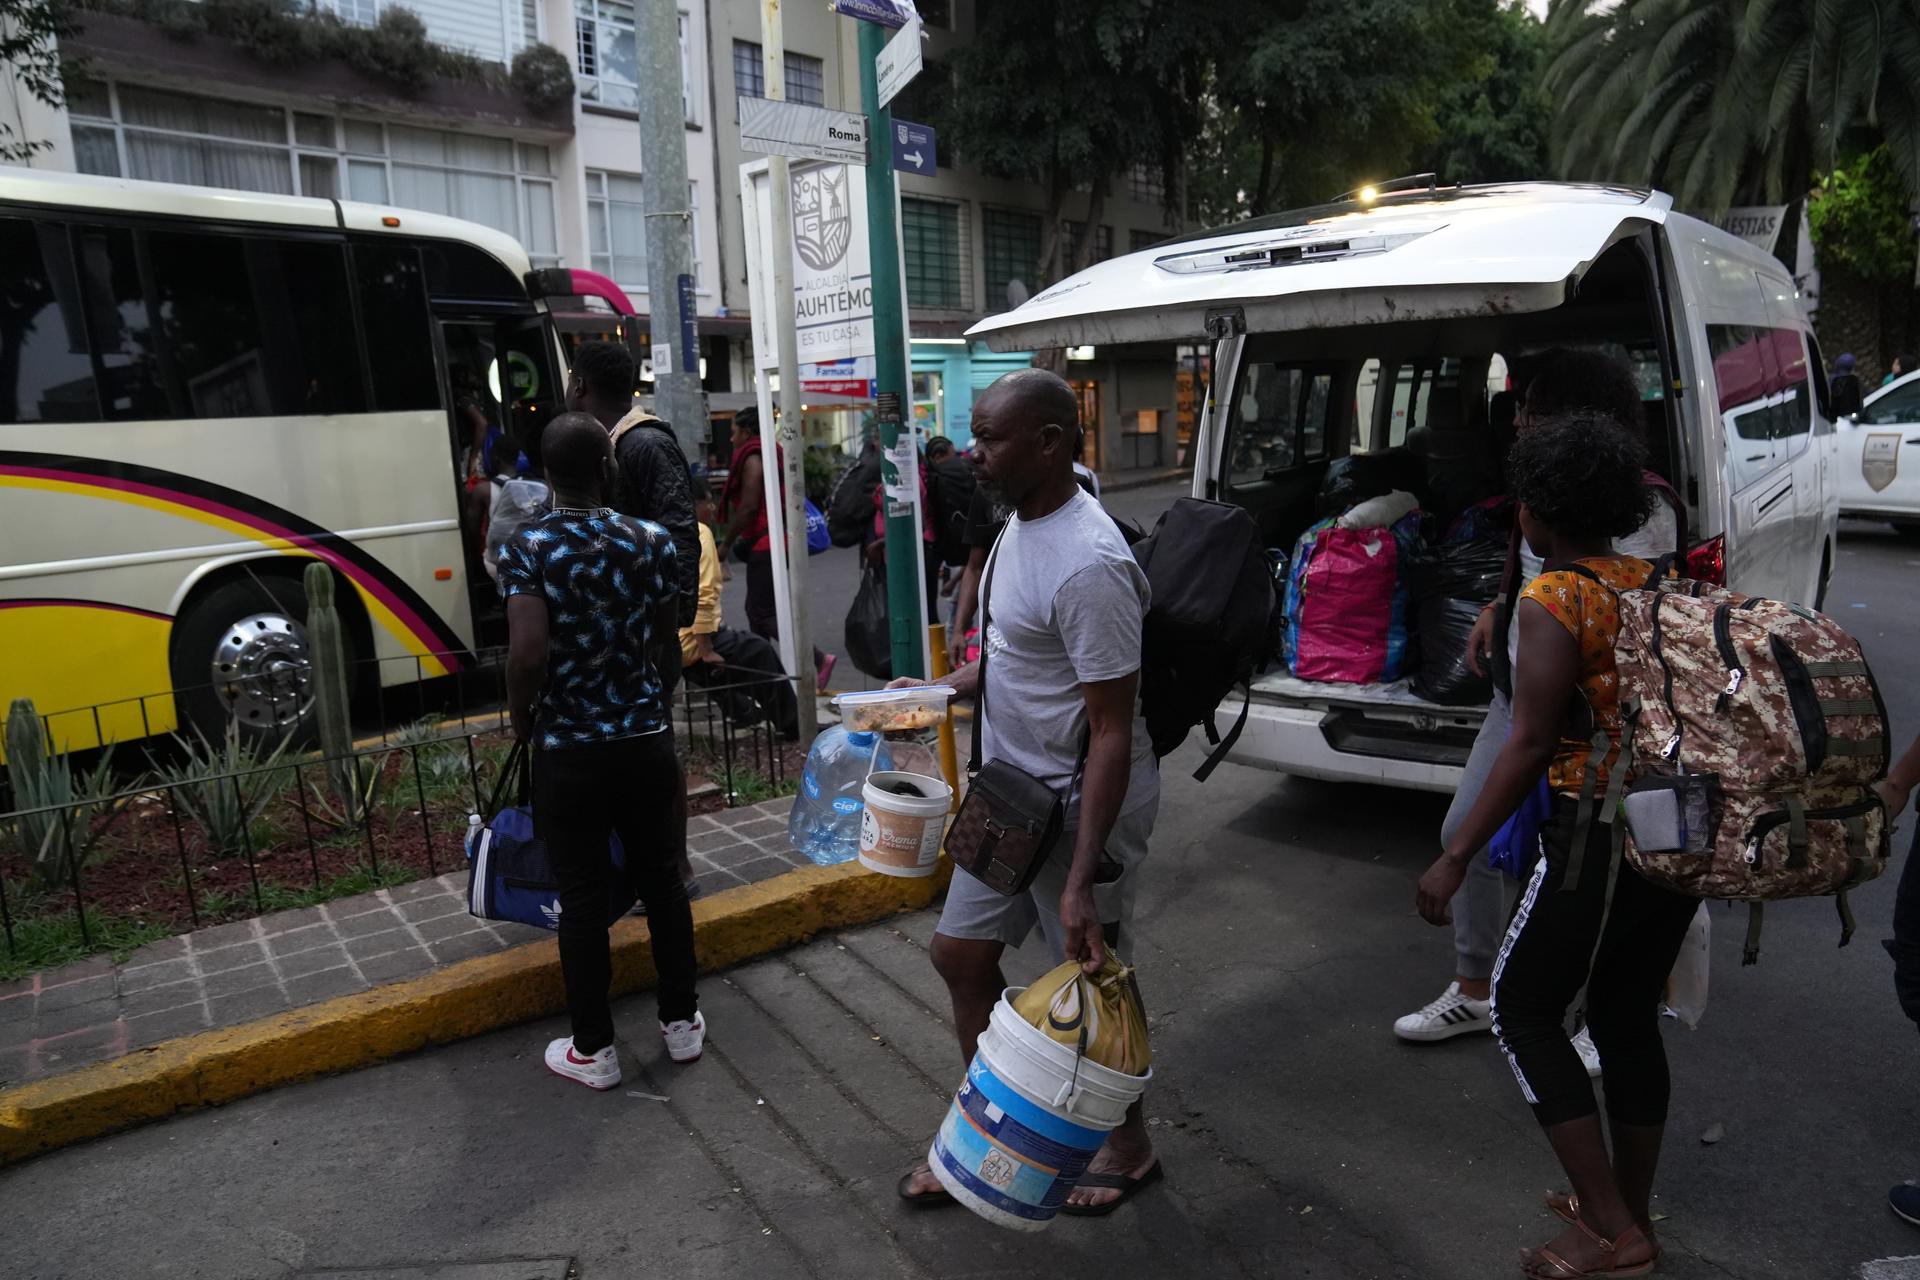 Haitian migrants were loaded onto buses and taken to a recently opened shelter on the outskirts of Mexico City.